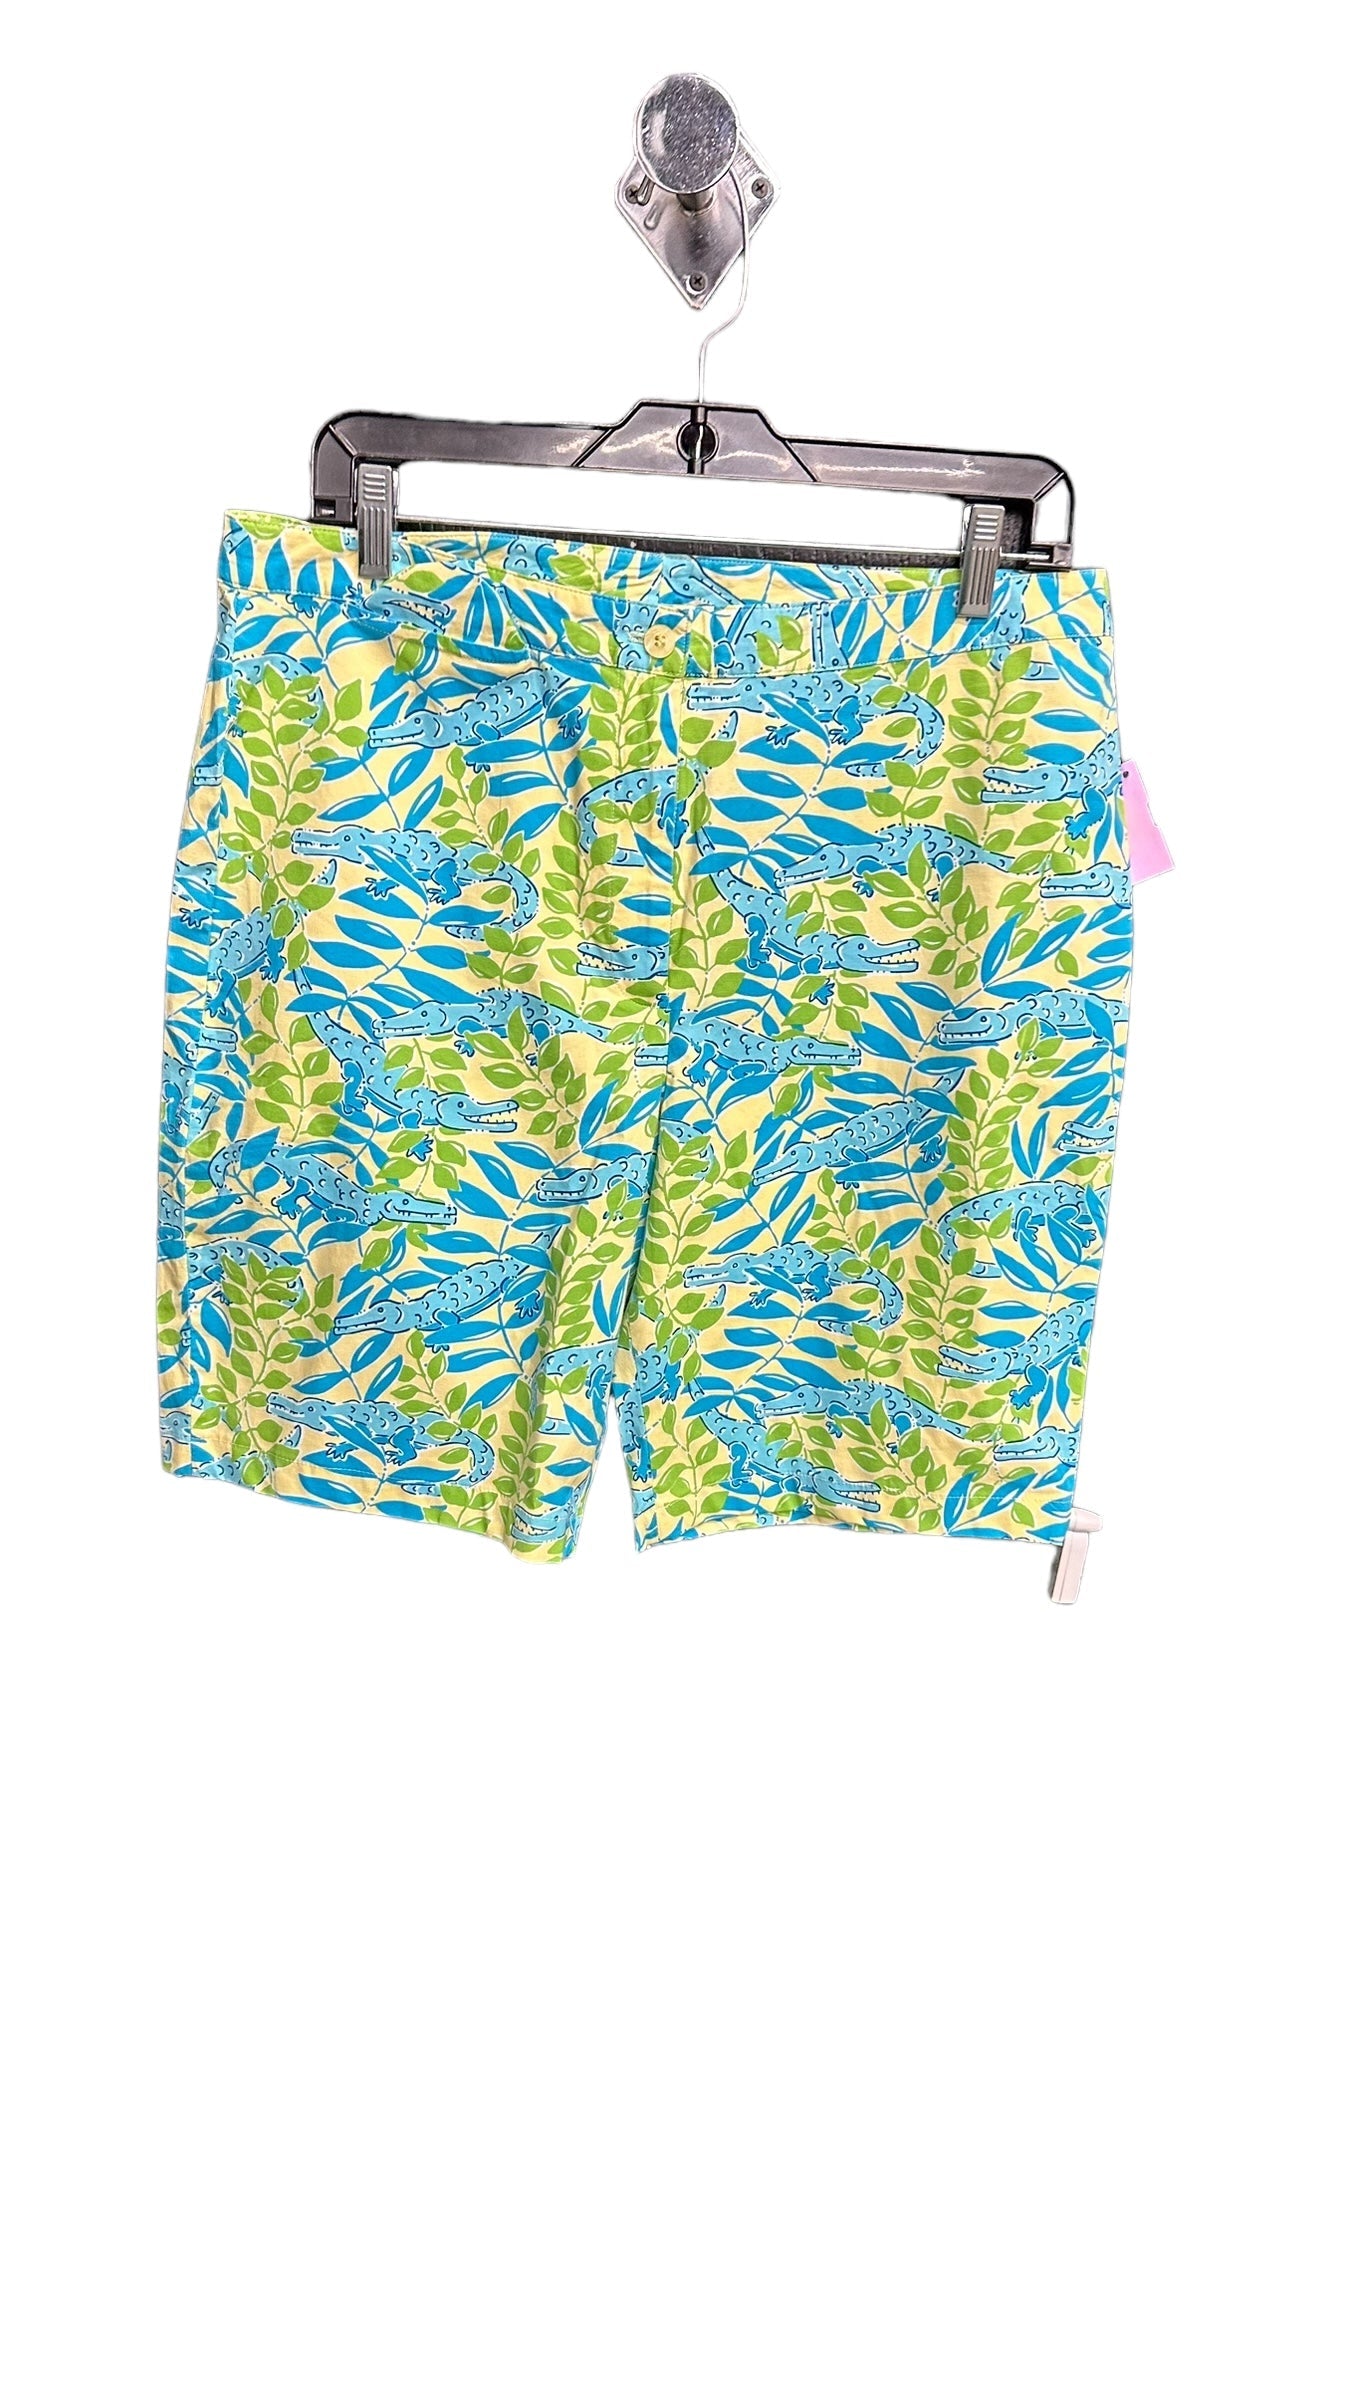 Multi-colored Shorts Lilly Pulitzer, Size 12